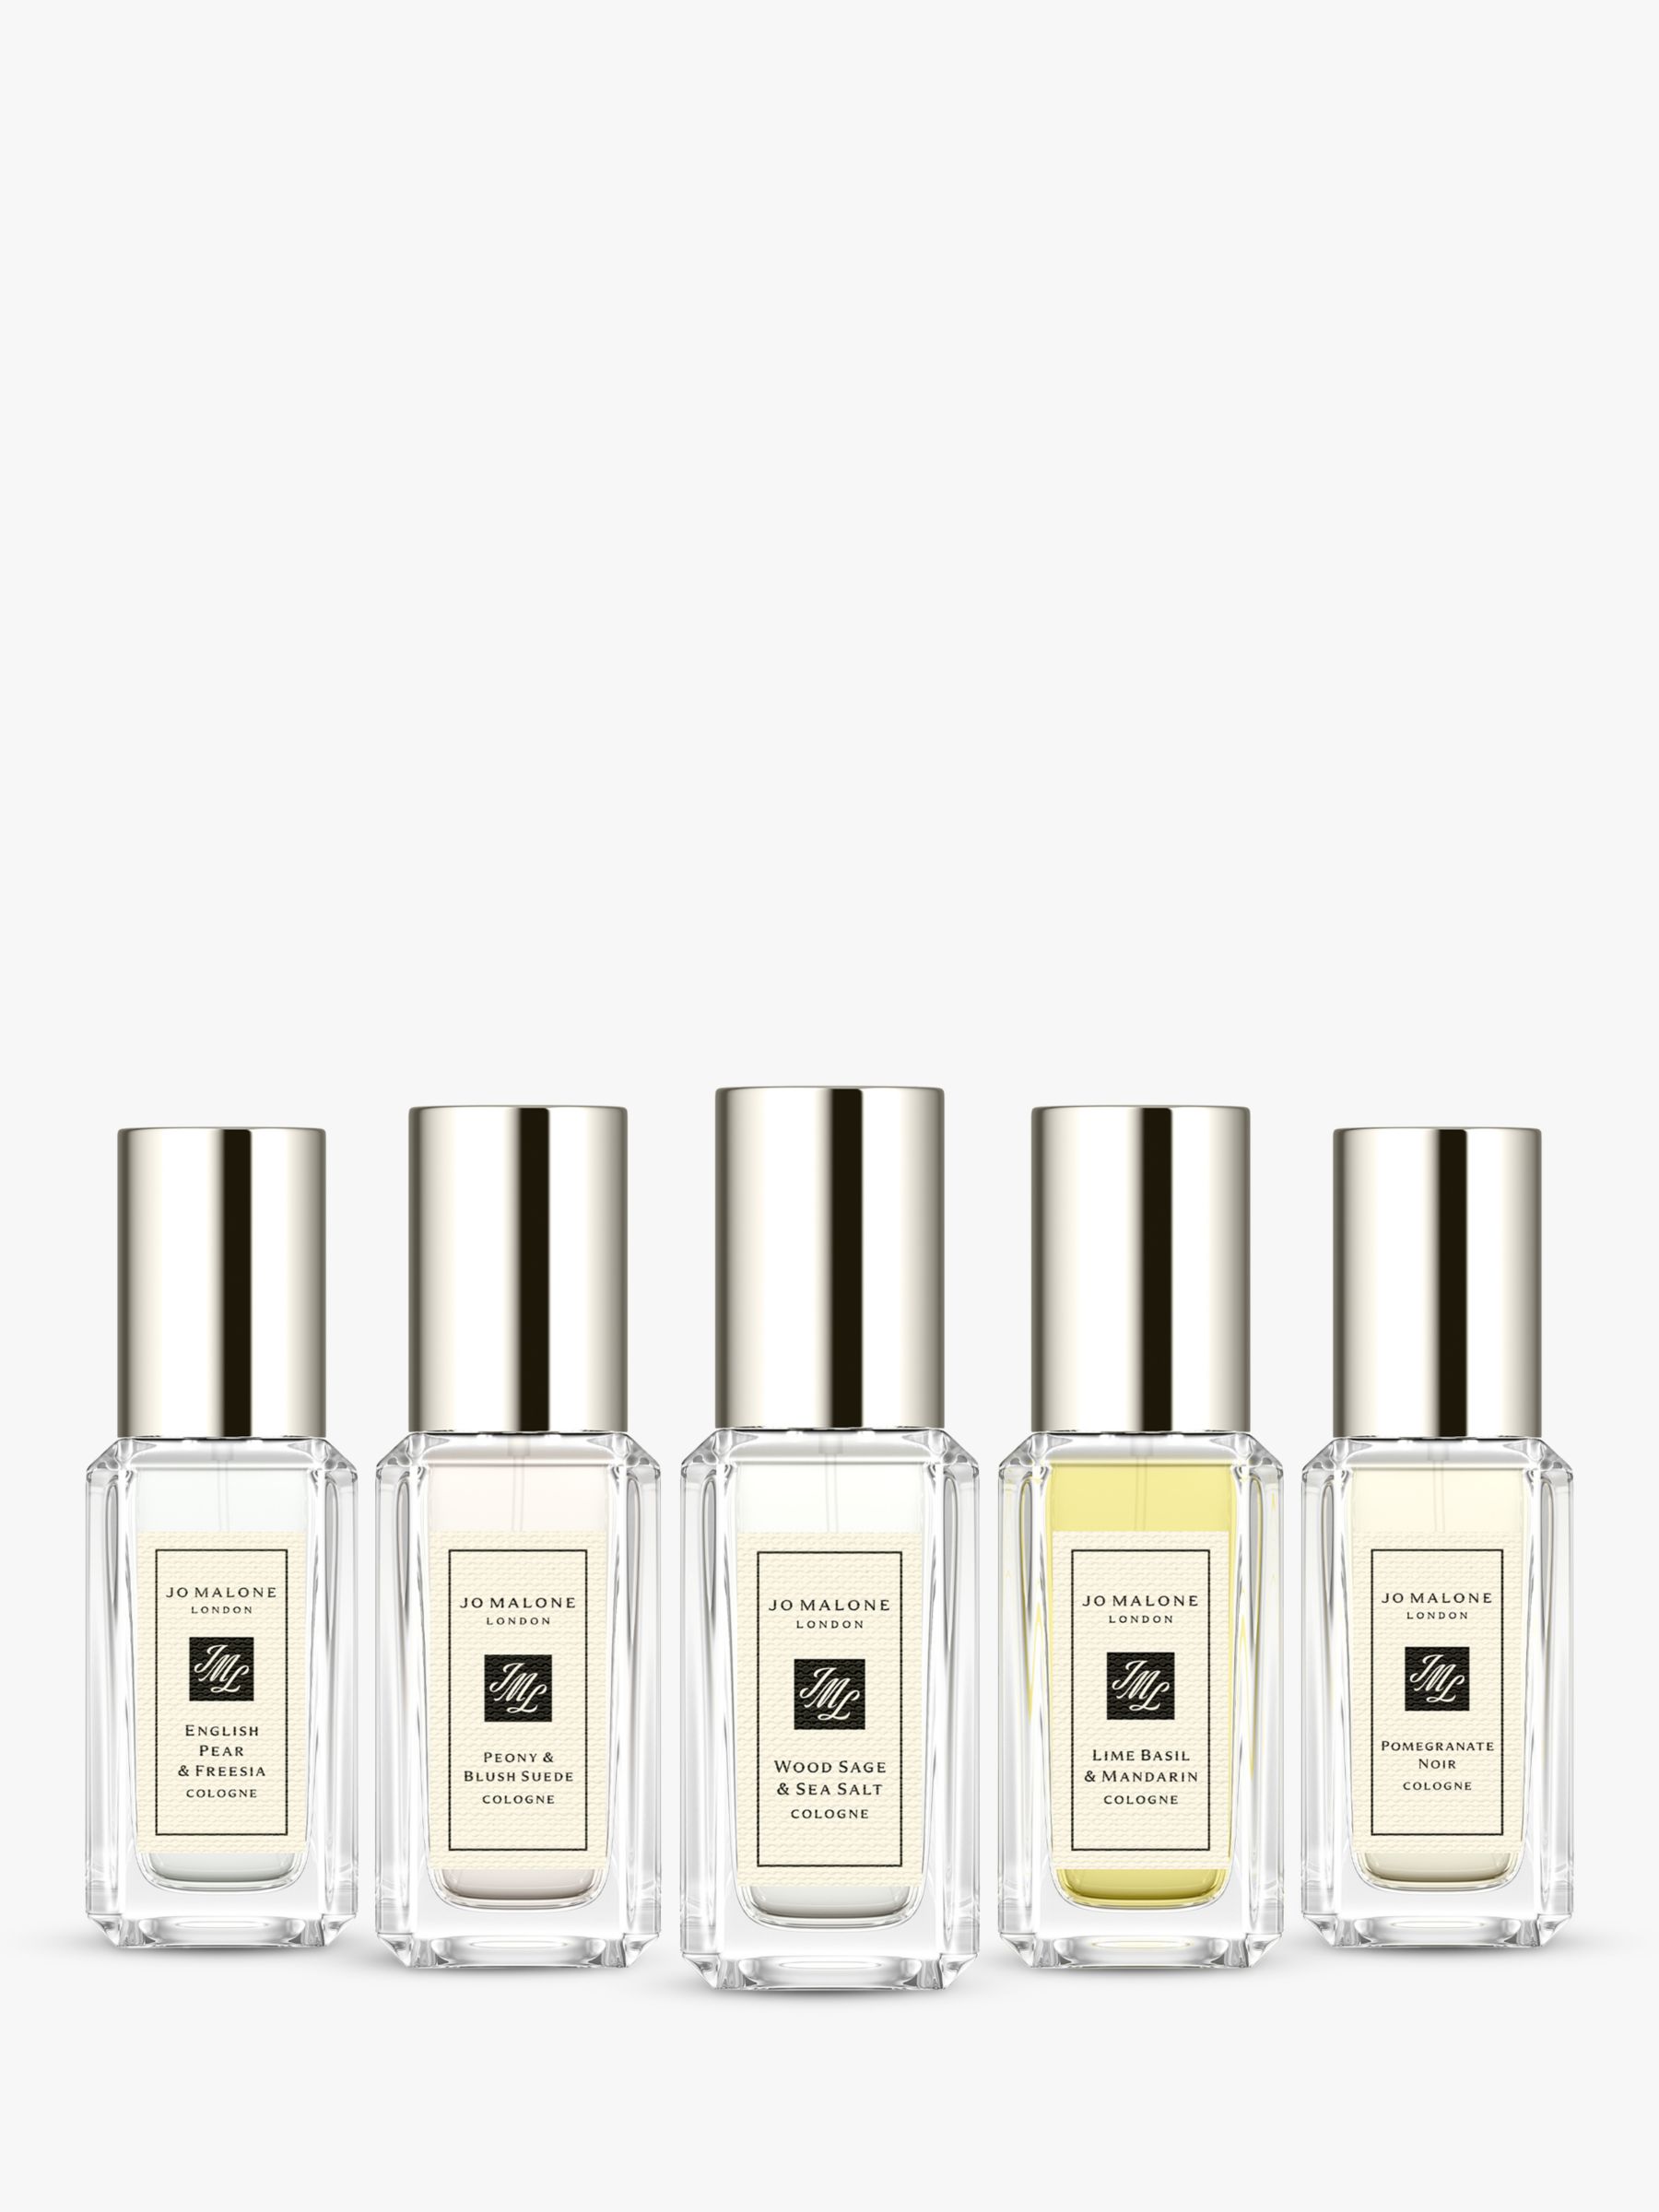 Jo Malone London Cologne Collection Fragrance Gift Set, 5 x 9ml